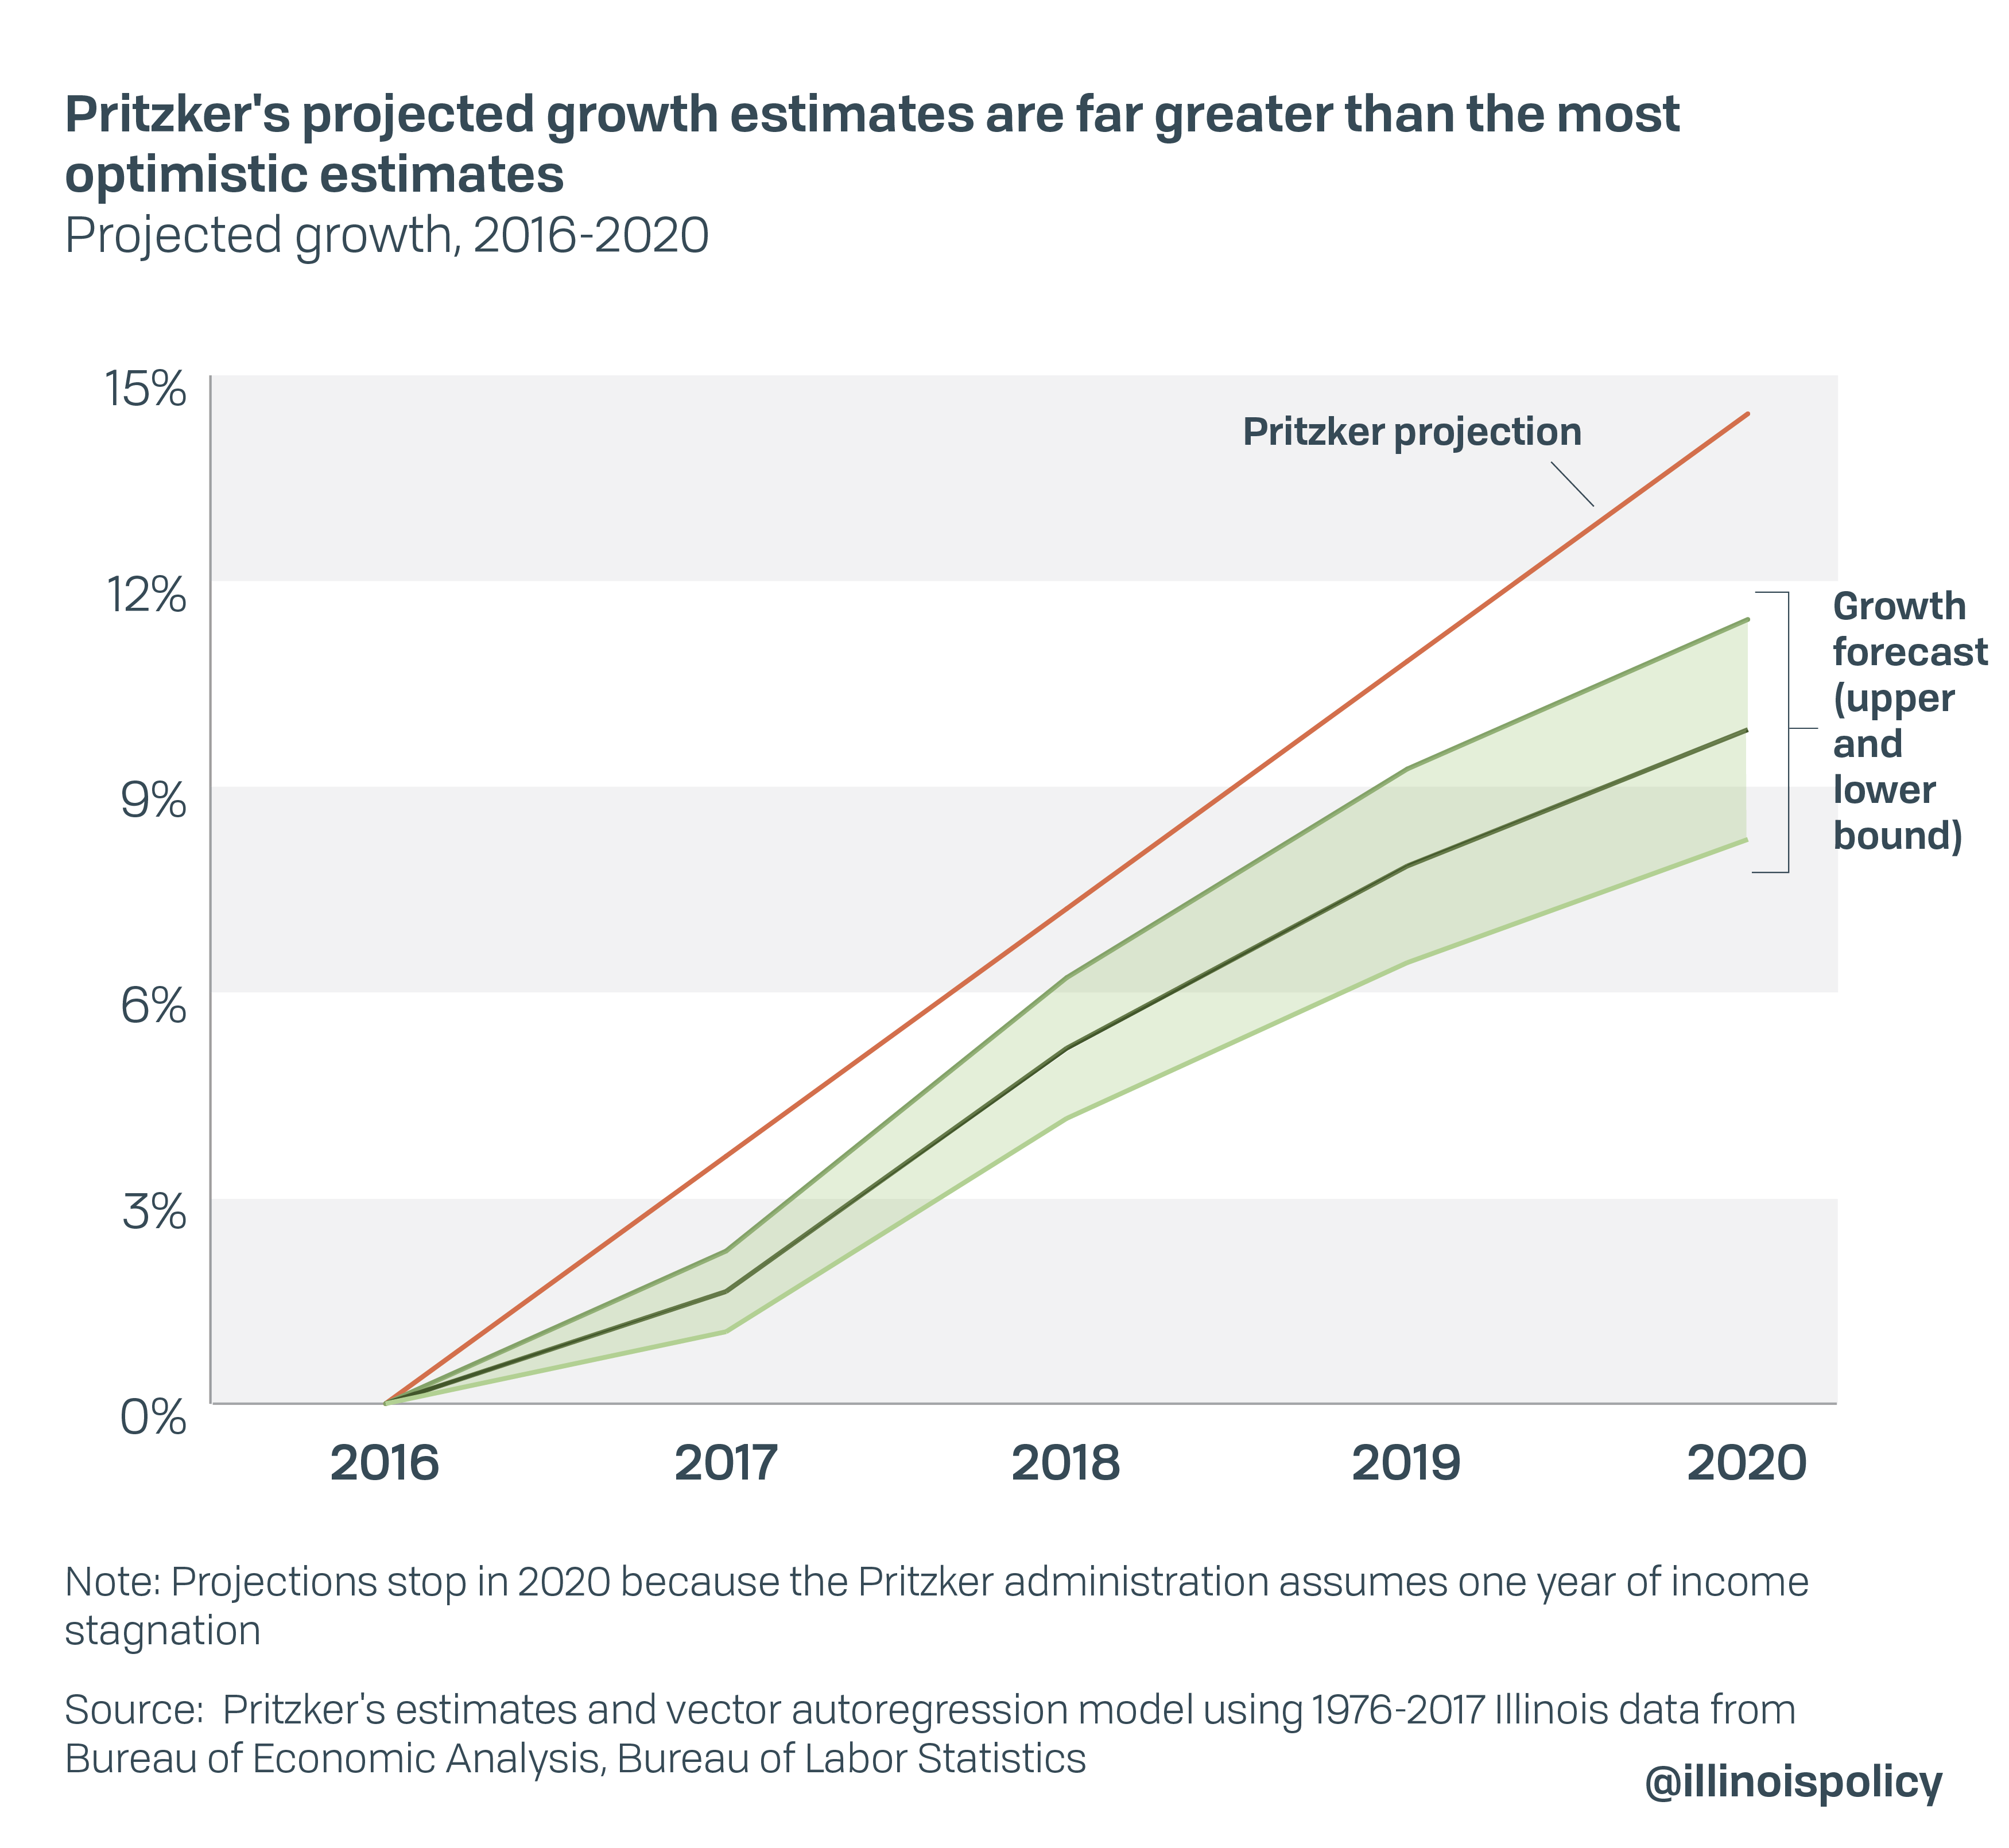 Pritzker's projected growth estimates are far greater than the most optimistic estimates